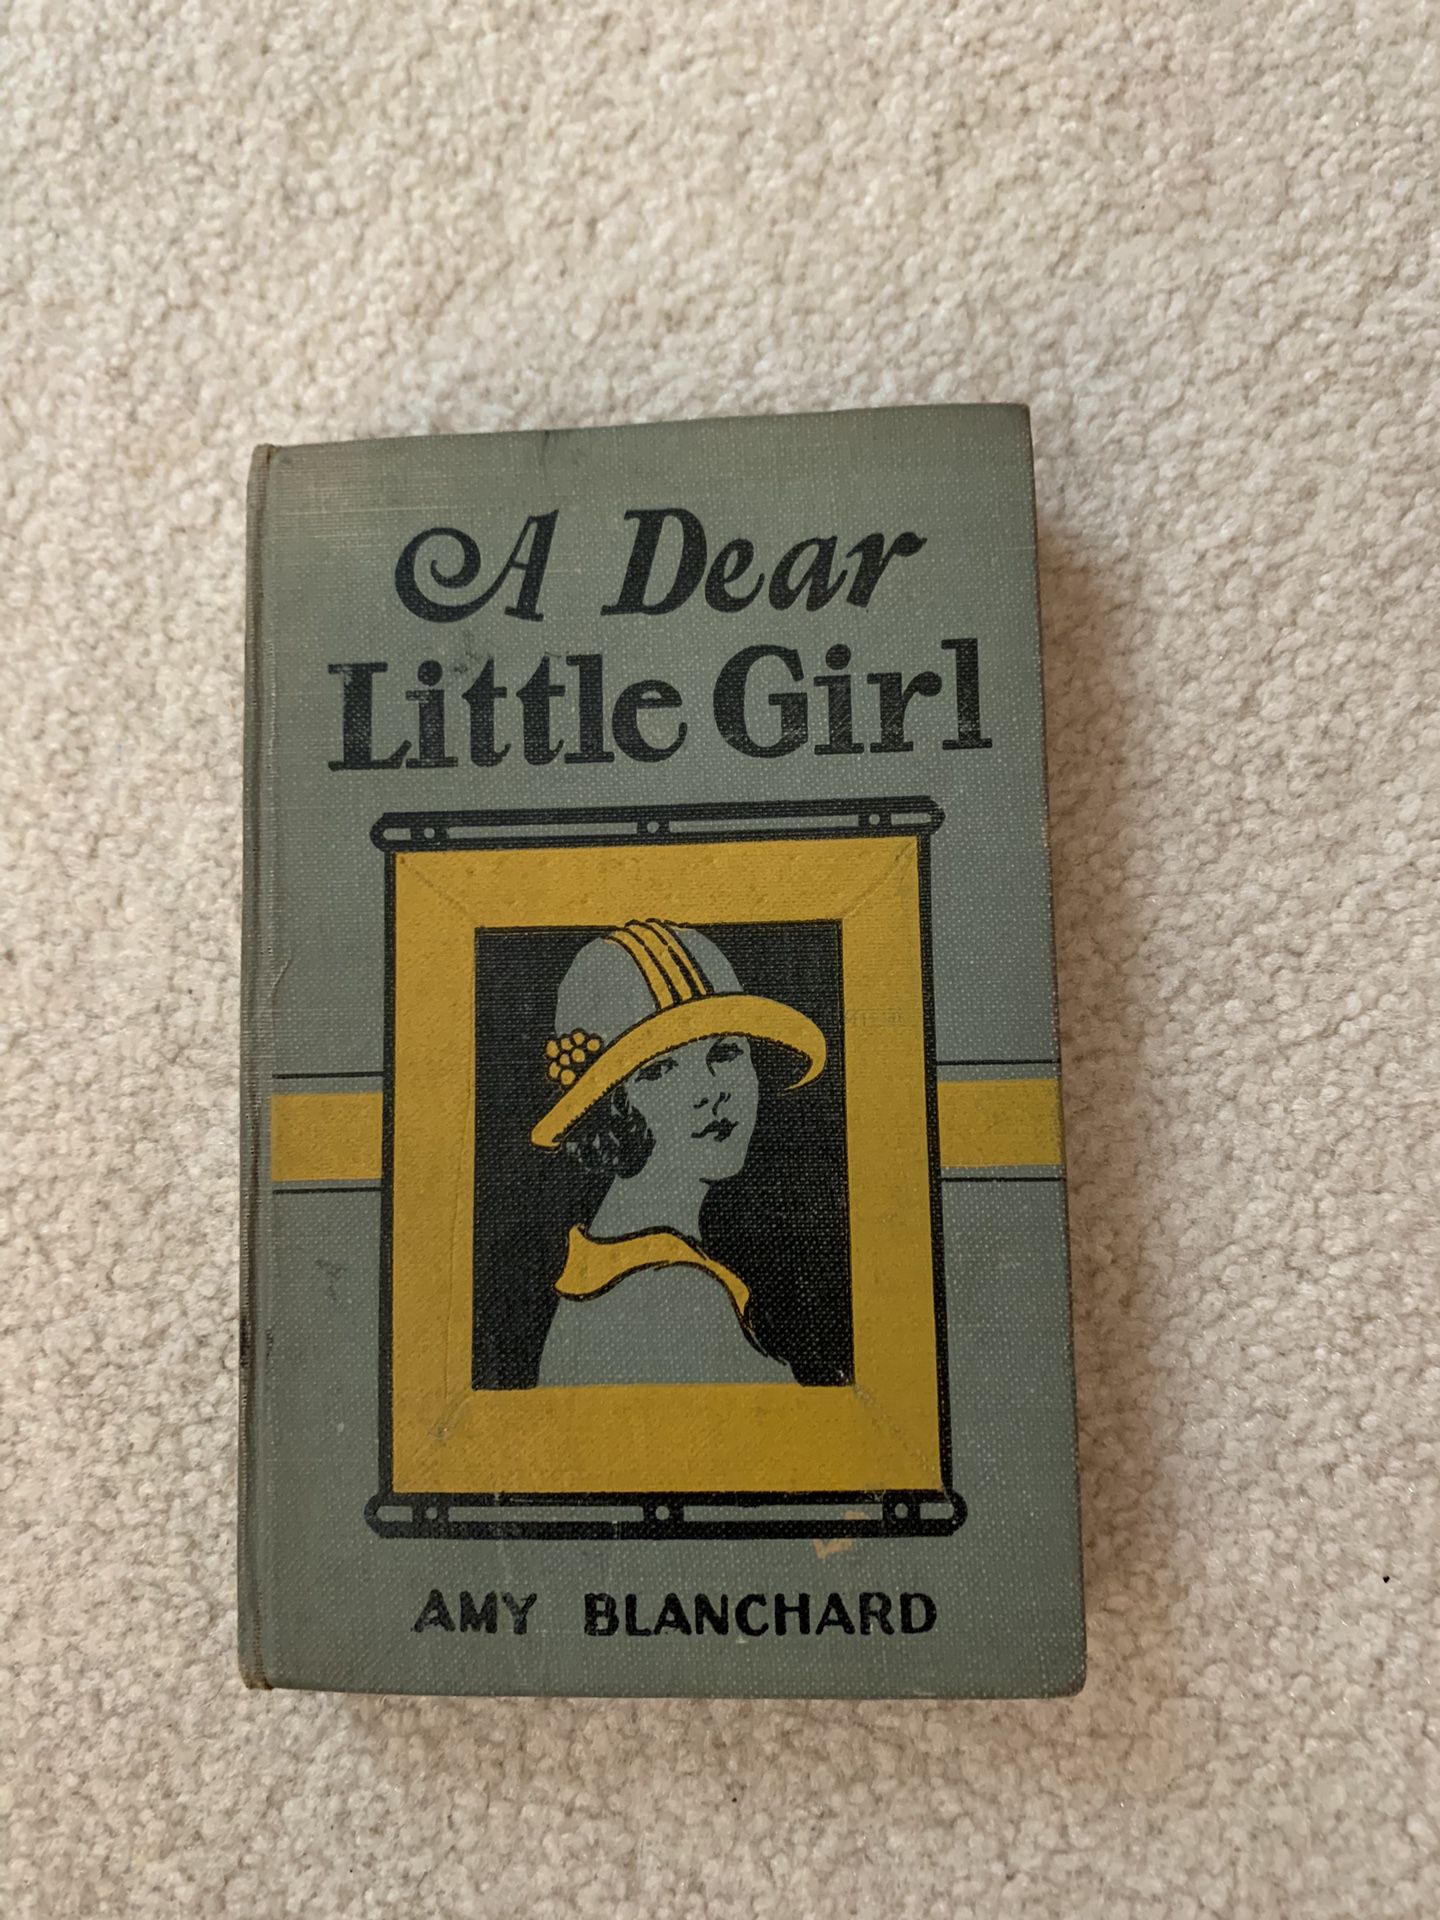 Vintage A DEAR LITTLE GIRL Book by Amy Blanchard from the 1920’s